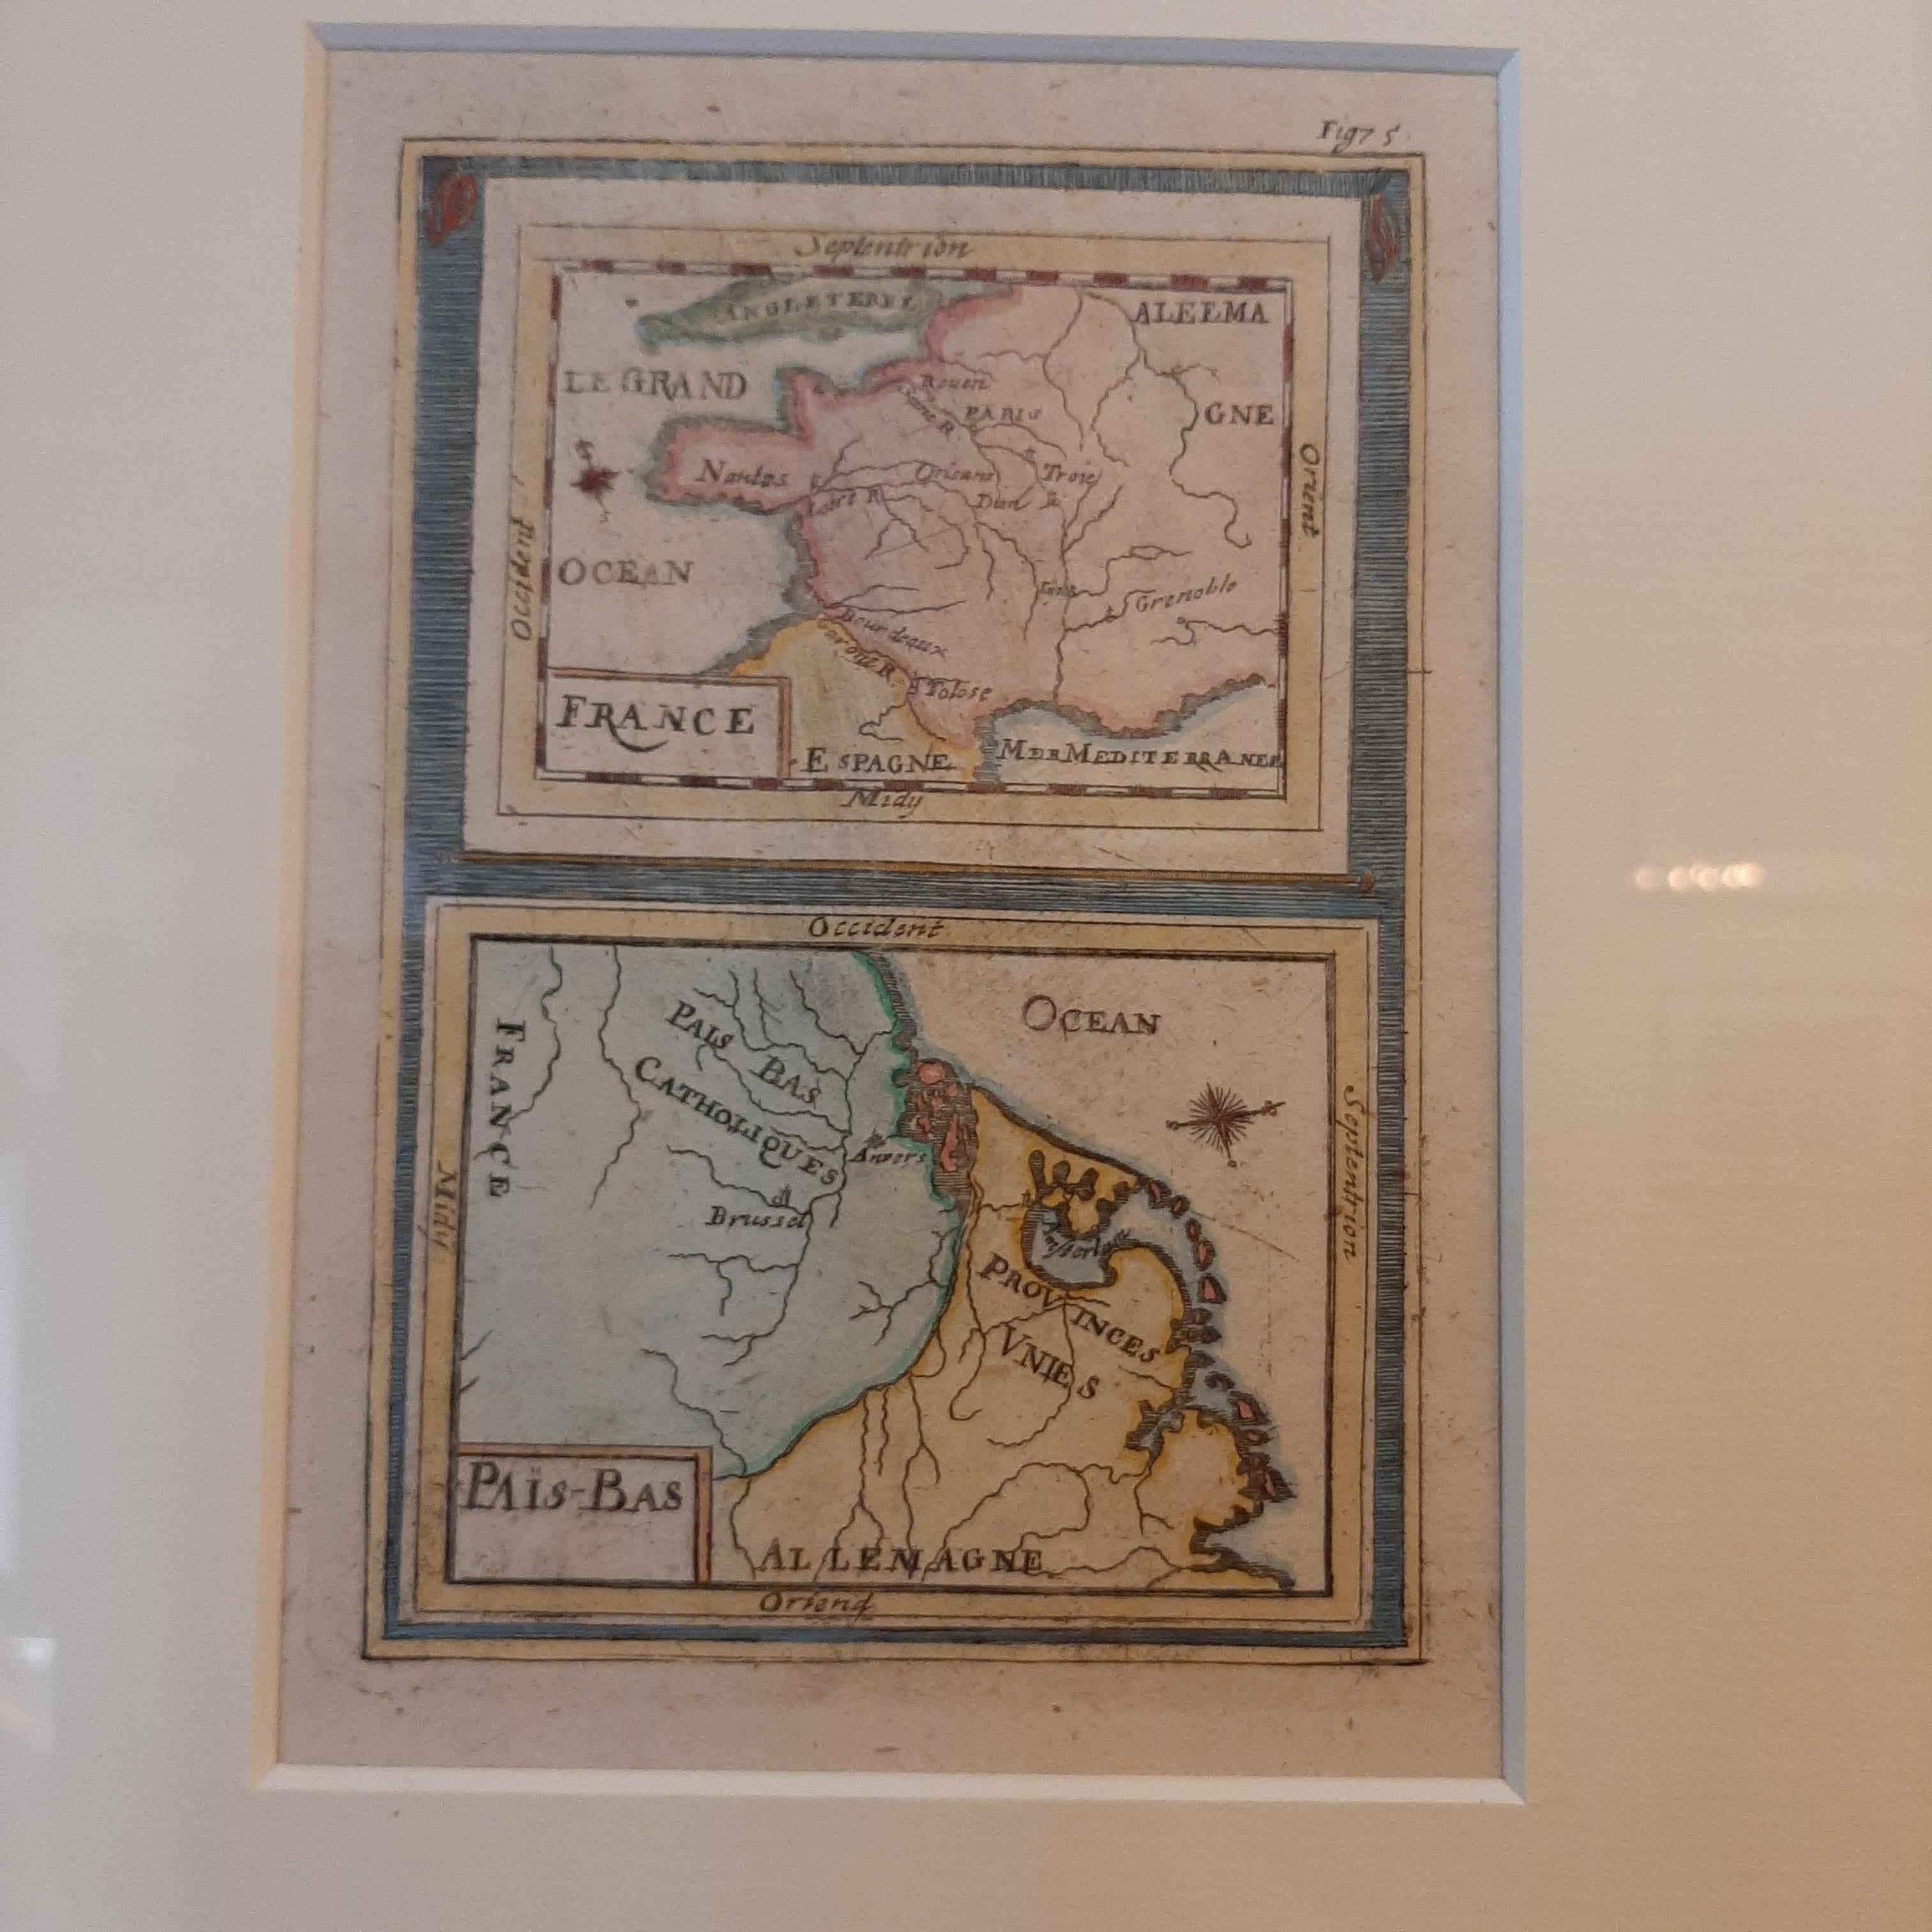 Antique map titled 'France - Païs-Bas'. Miniature Map of France and the Low Countries. Published by A.M. Mallet, circa 1719.

Frame included. We carefully pack our framed items to ensure safe shipping.